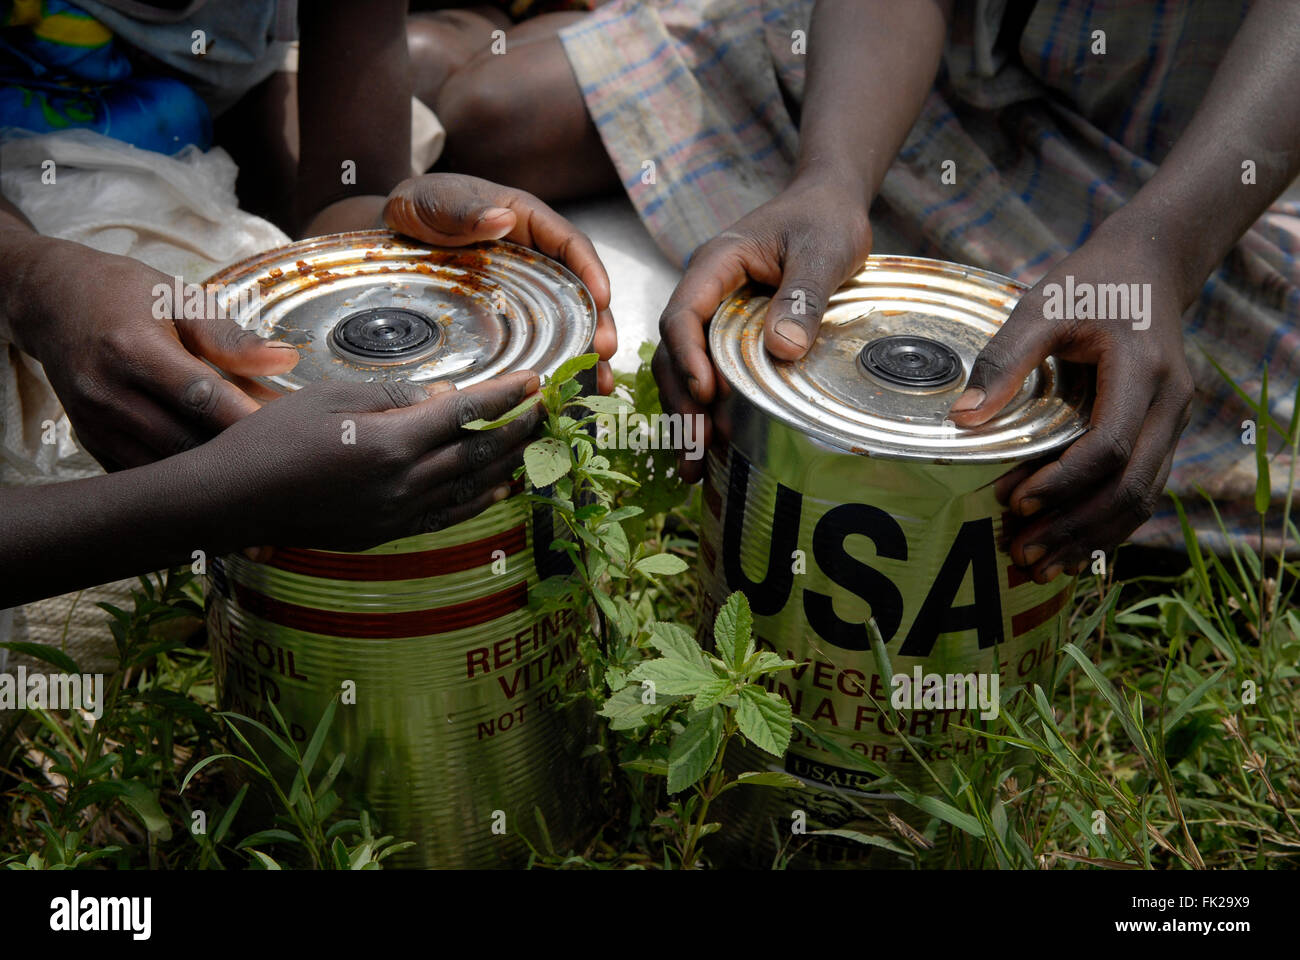 Internally displaced people hold cans of refined vegetable oil donated by USAID agency during UN World Food Programme food distribution in North Kivu province DR Congo Africa Stock Photo